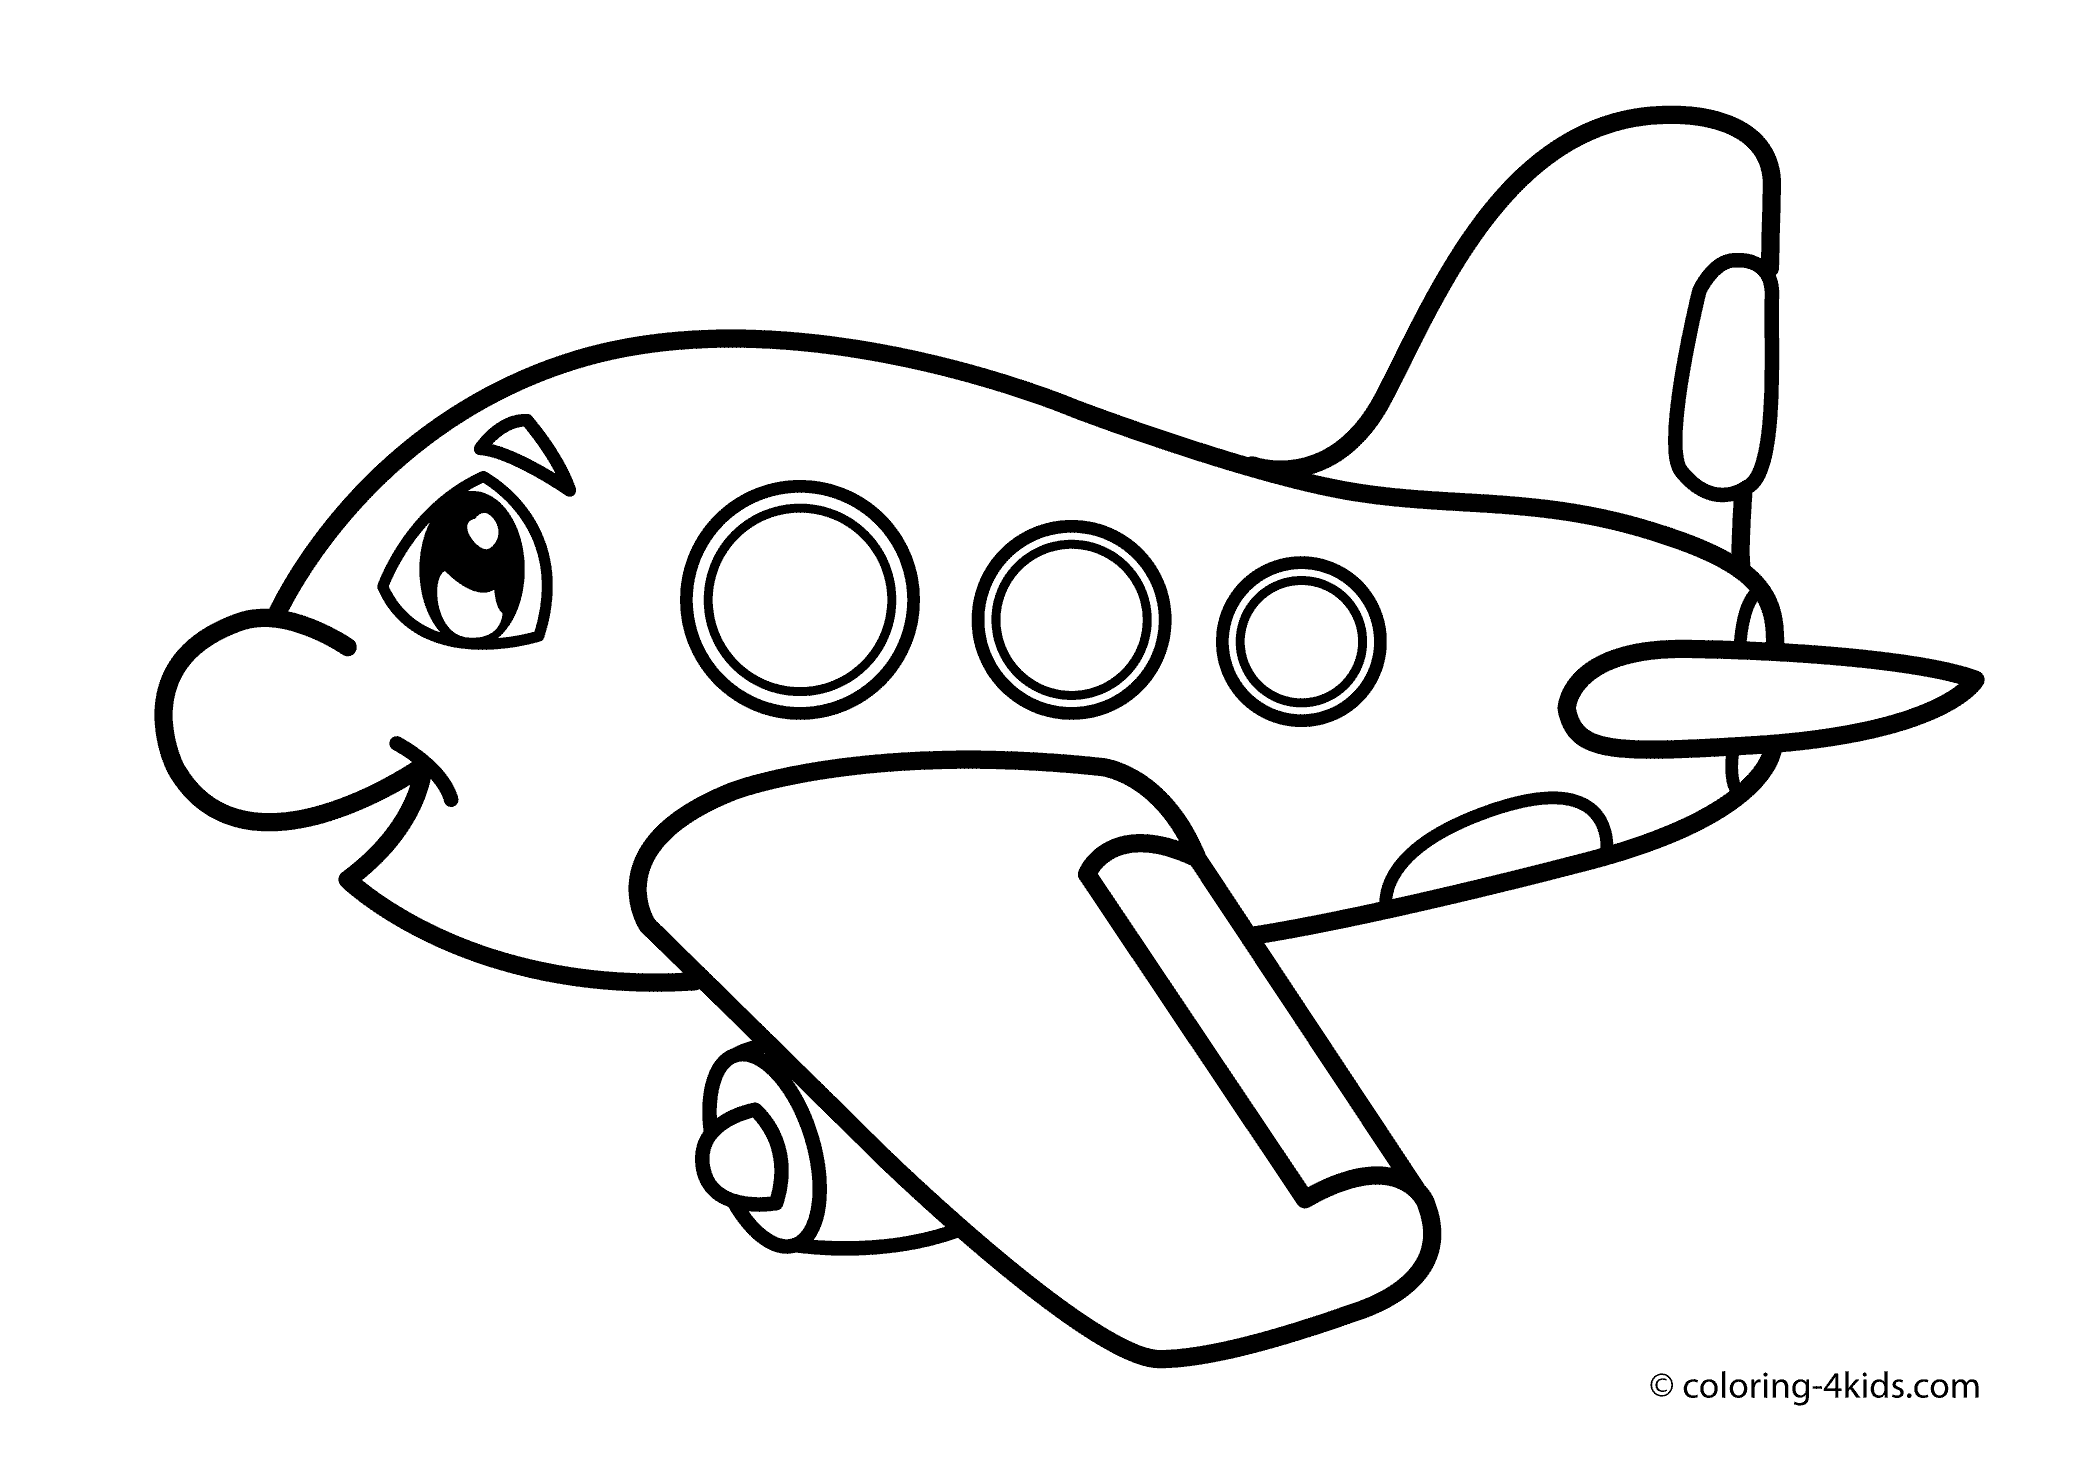 transportation coloring pages for kids funny airplane transportation coloring pages for kids for coloring kids pages transportation 